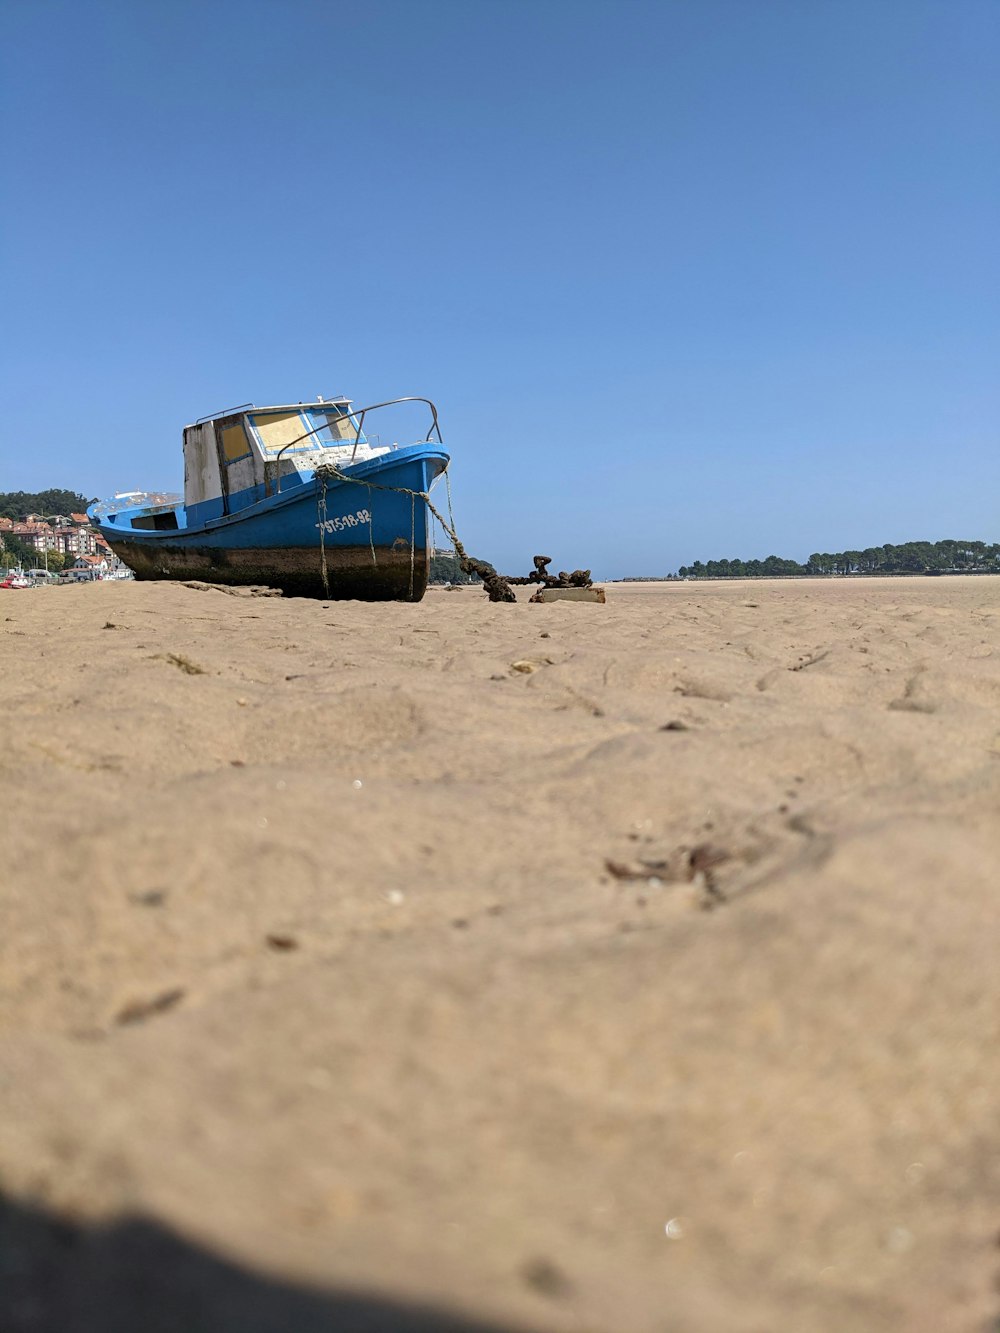 a blue boat sitting on top of a sandy beach